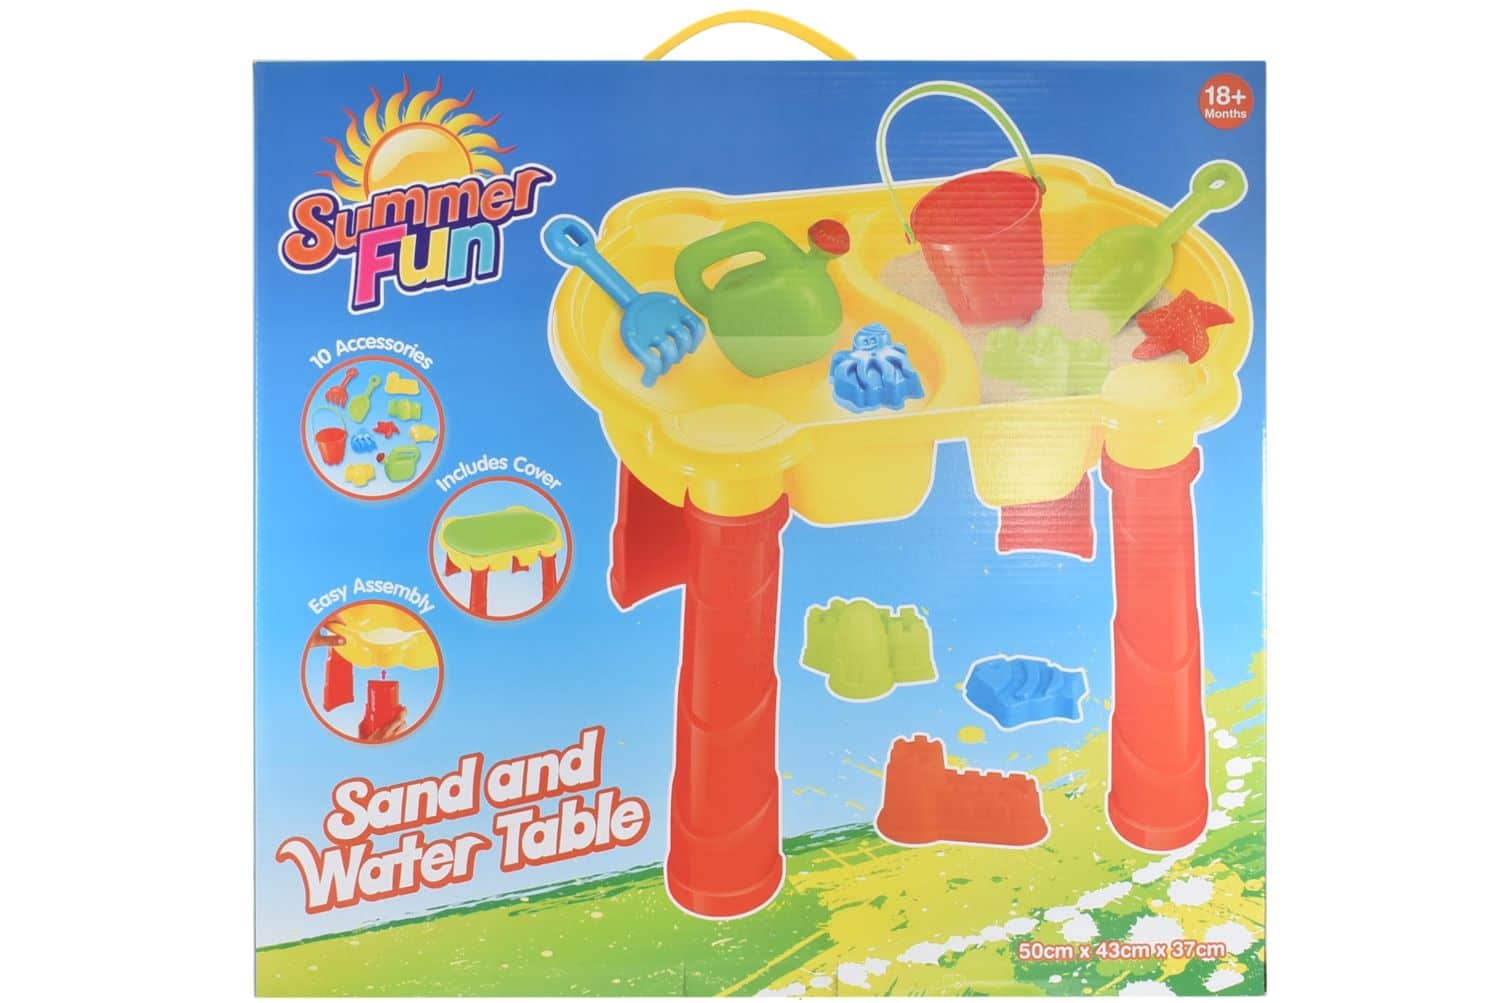 Sand And Water Table - 50X43X37Cm